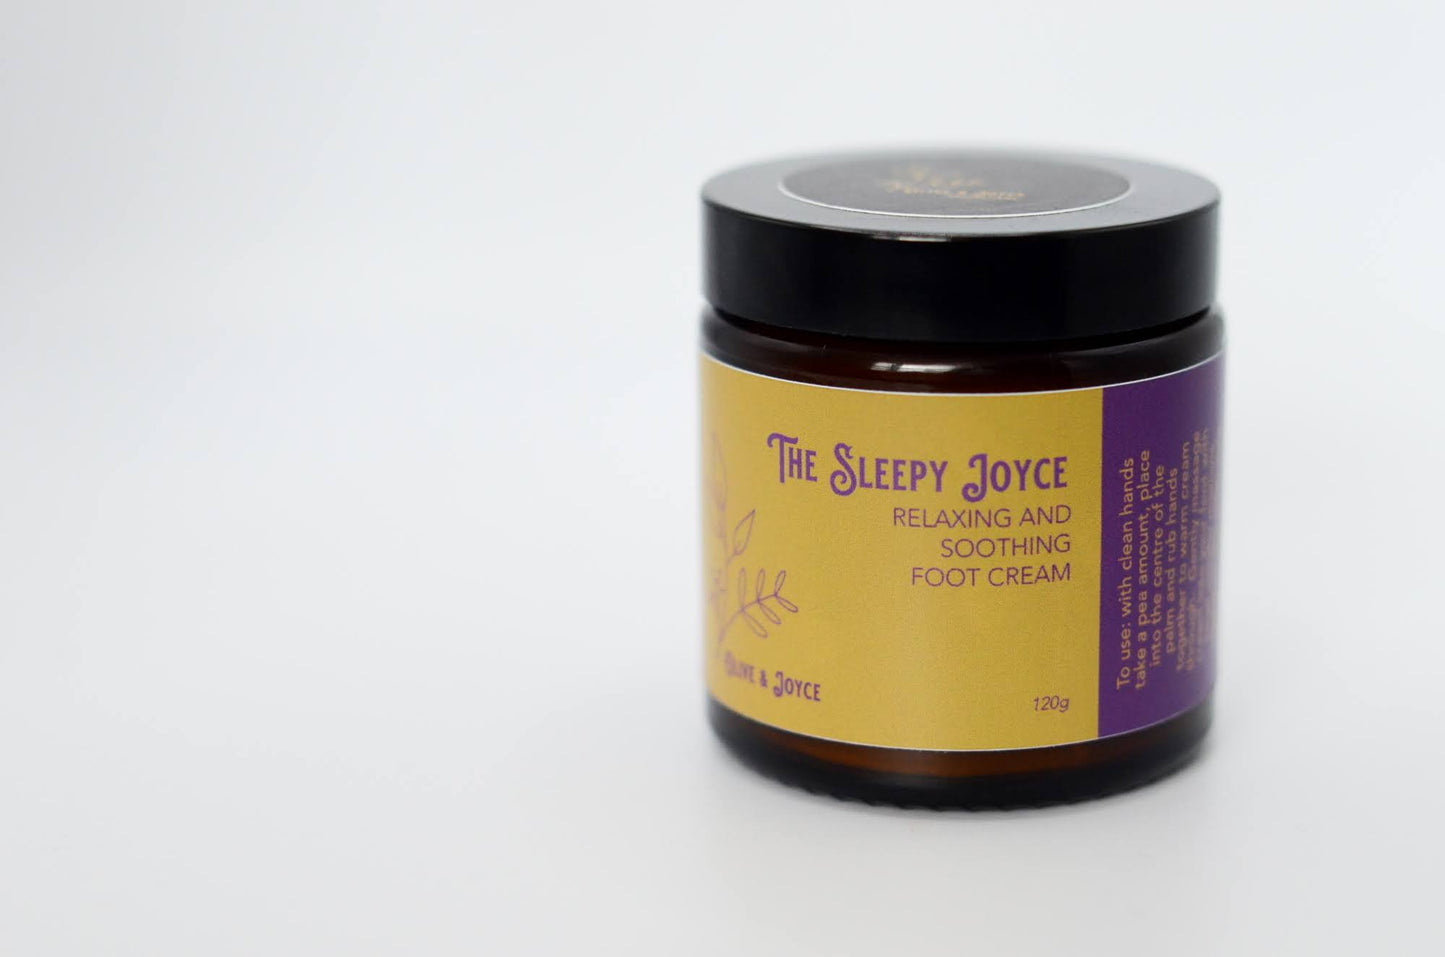 Natural skincare for the feet, helps sleep, relaxing foot moisturiser by the natural skincare company